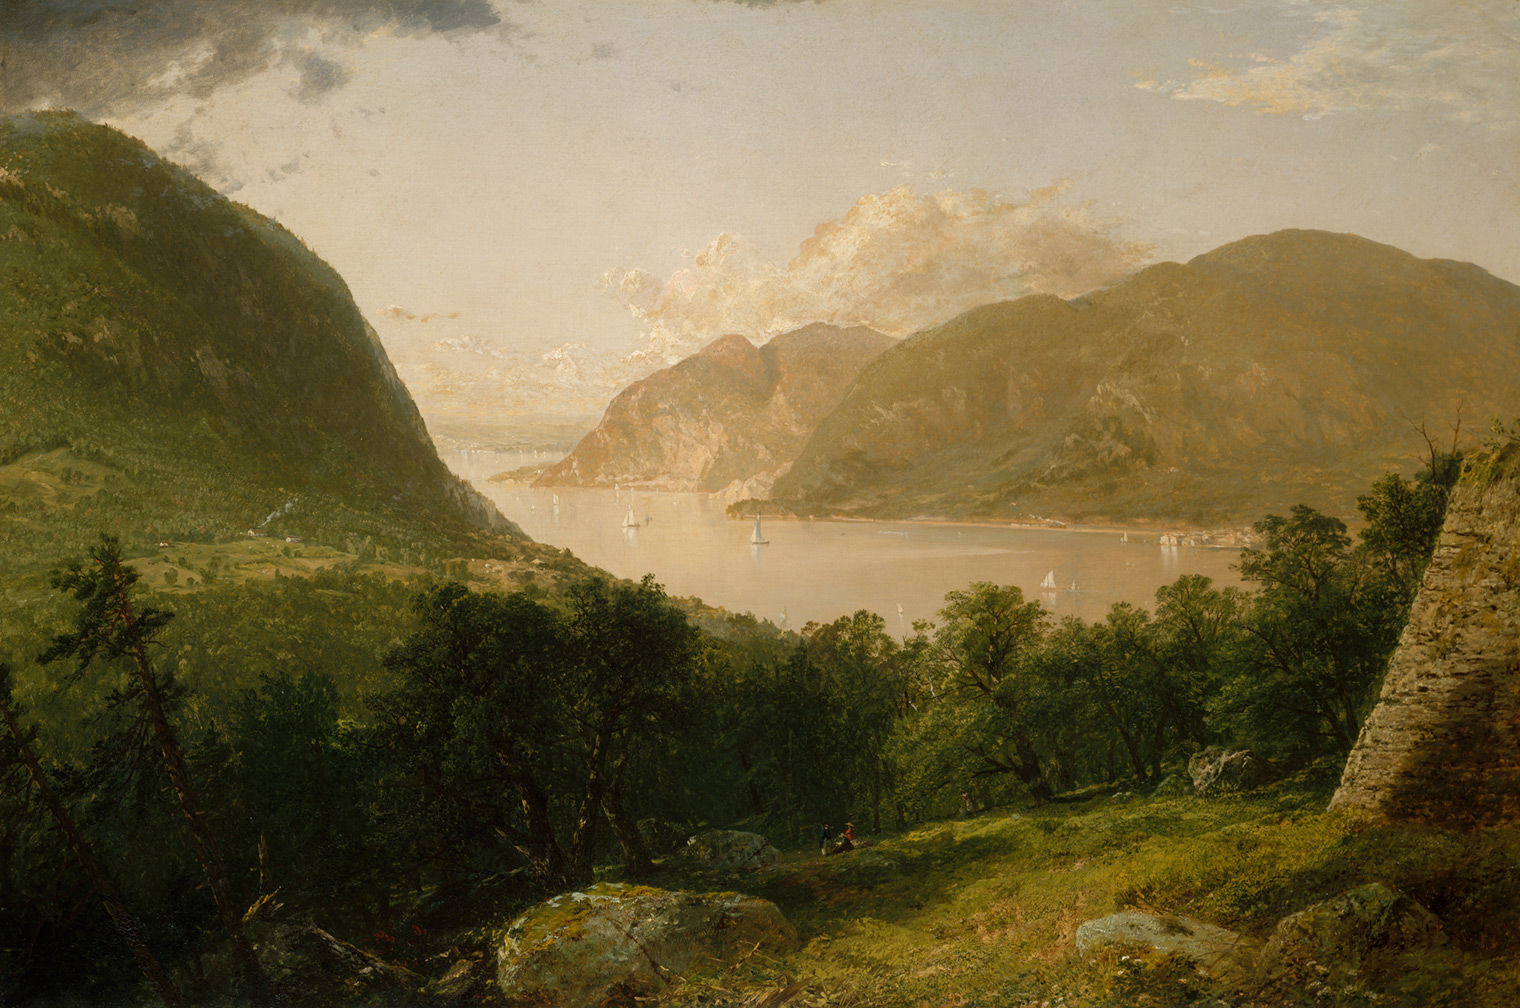 A painting of a wide river carving through mountains, with clouds